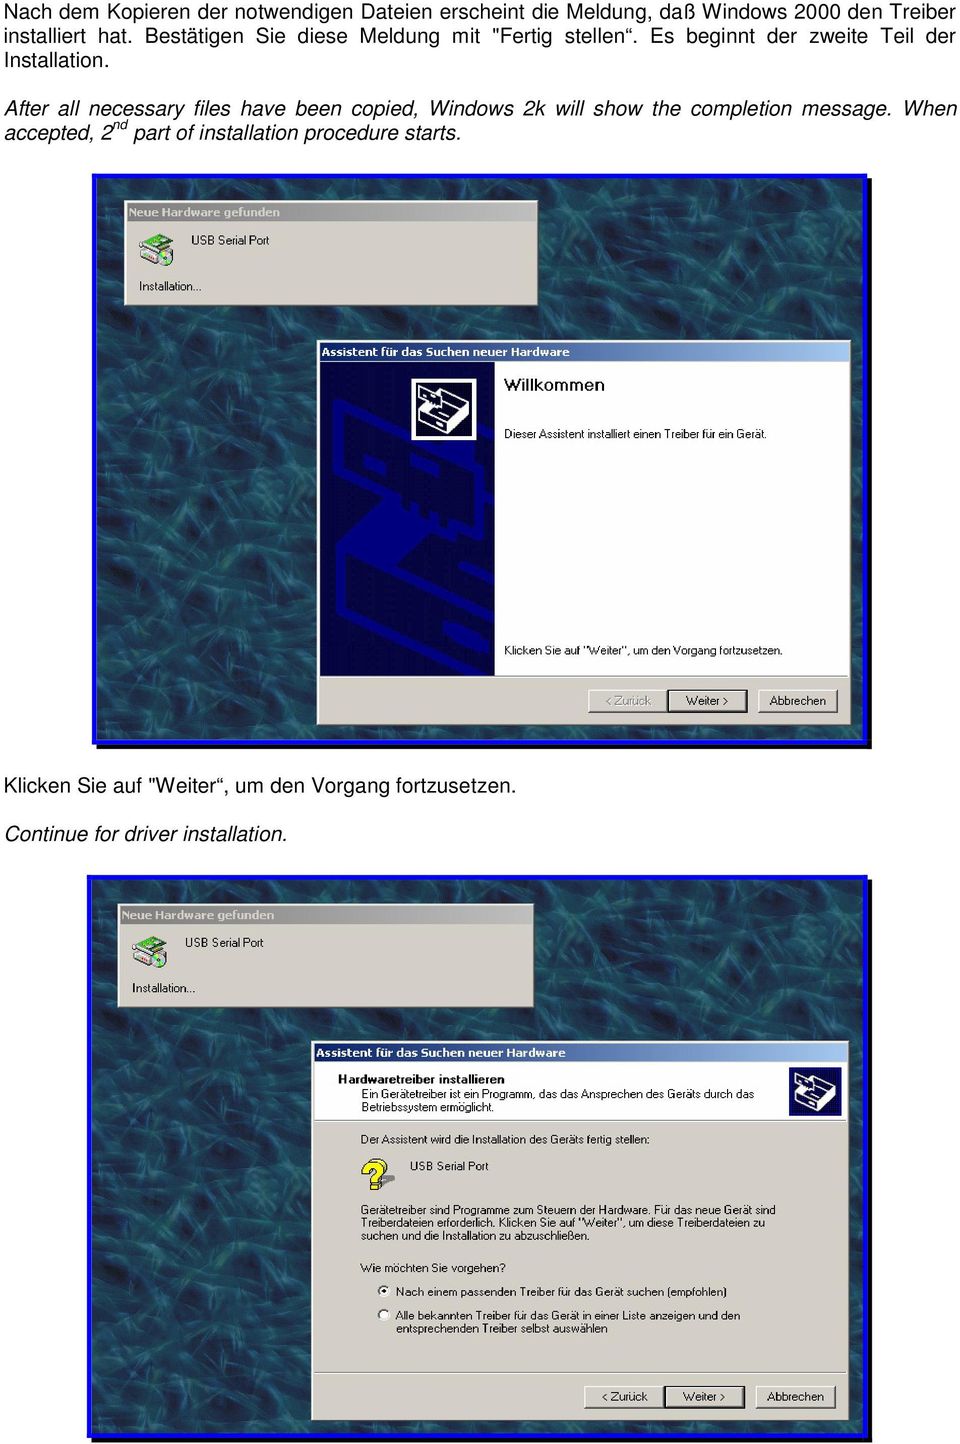 After all necessary files have been copied, Windows 2k will show the completion message.